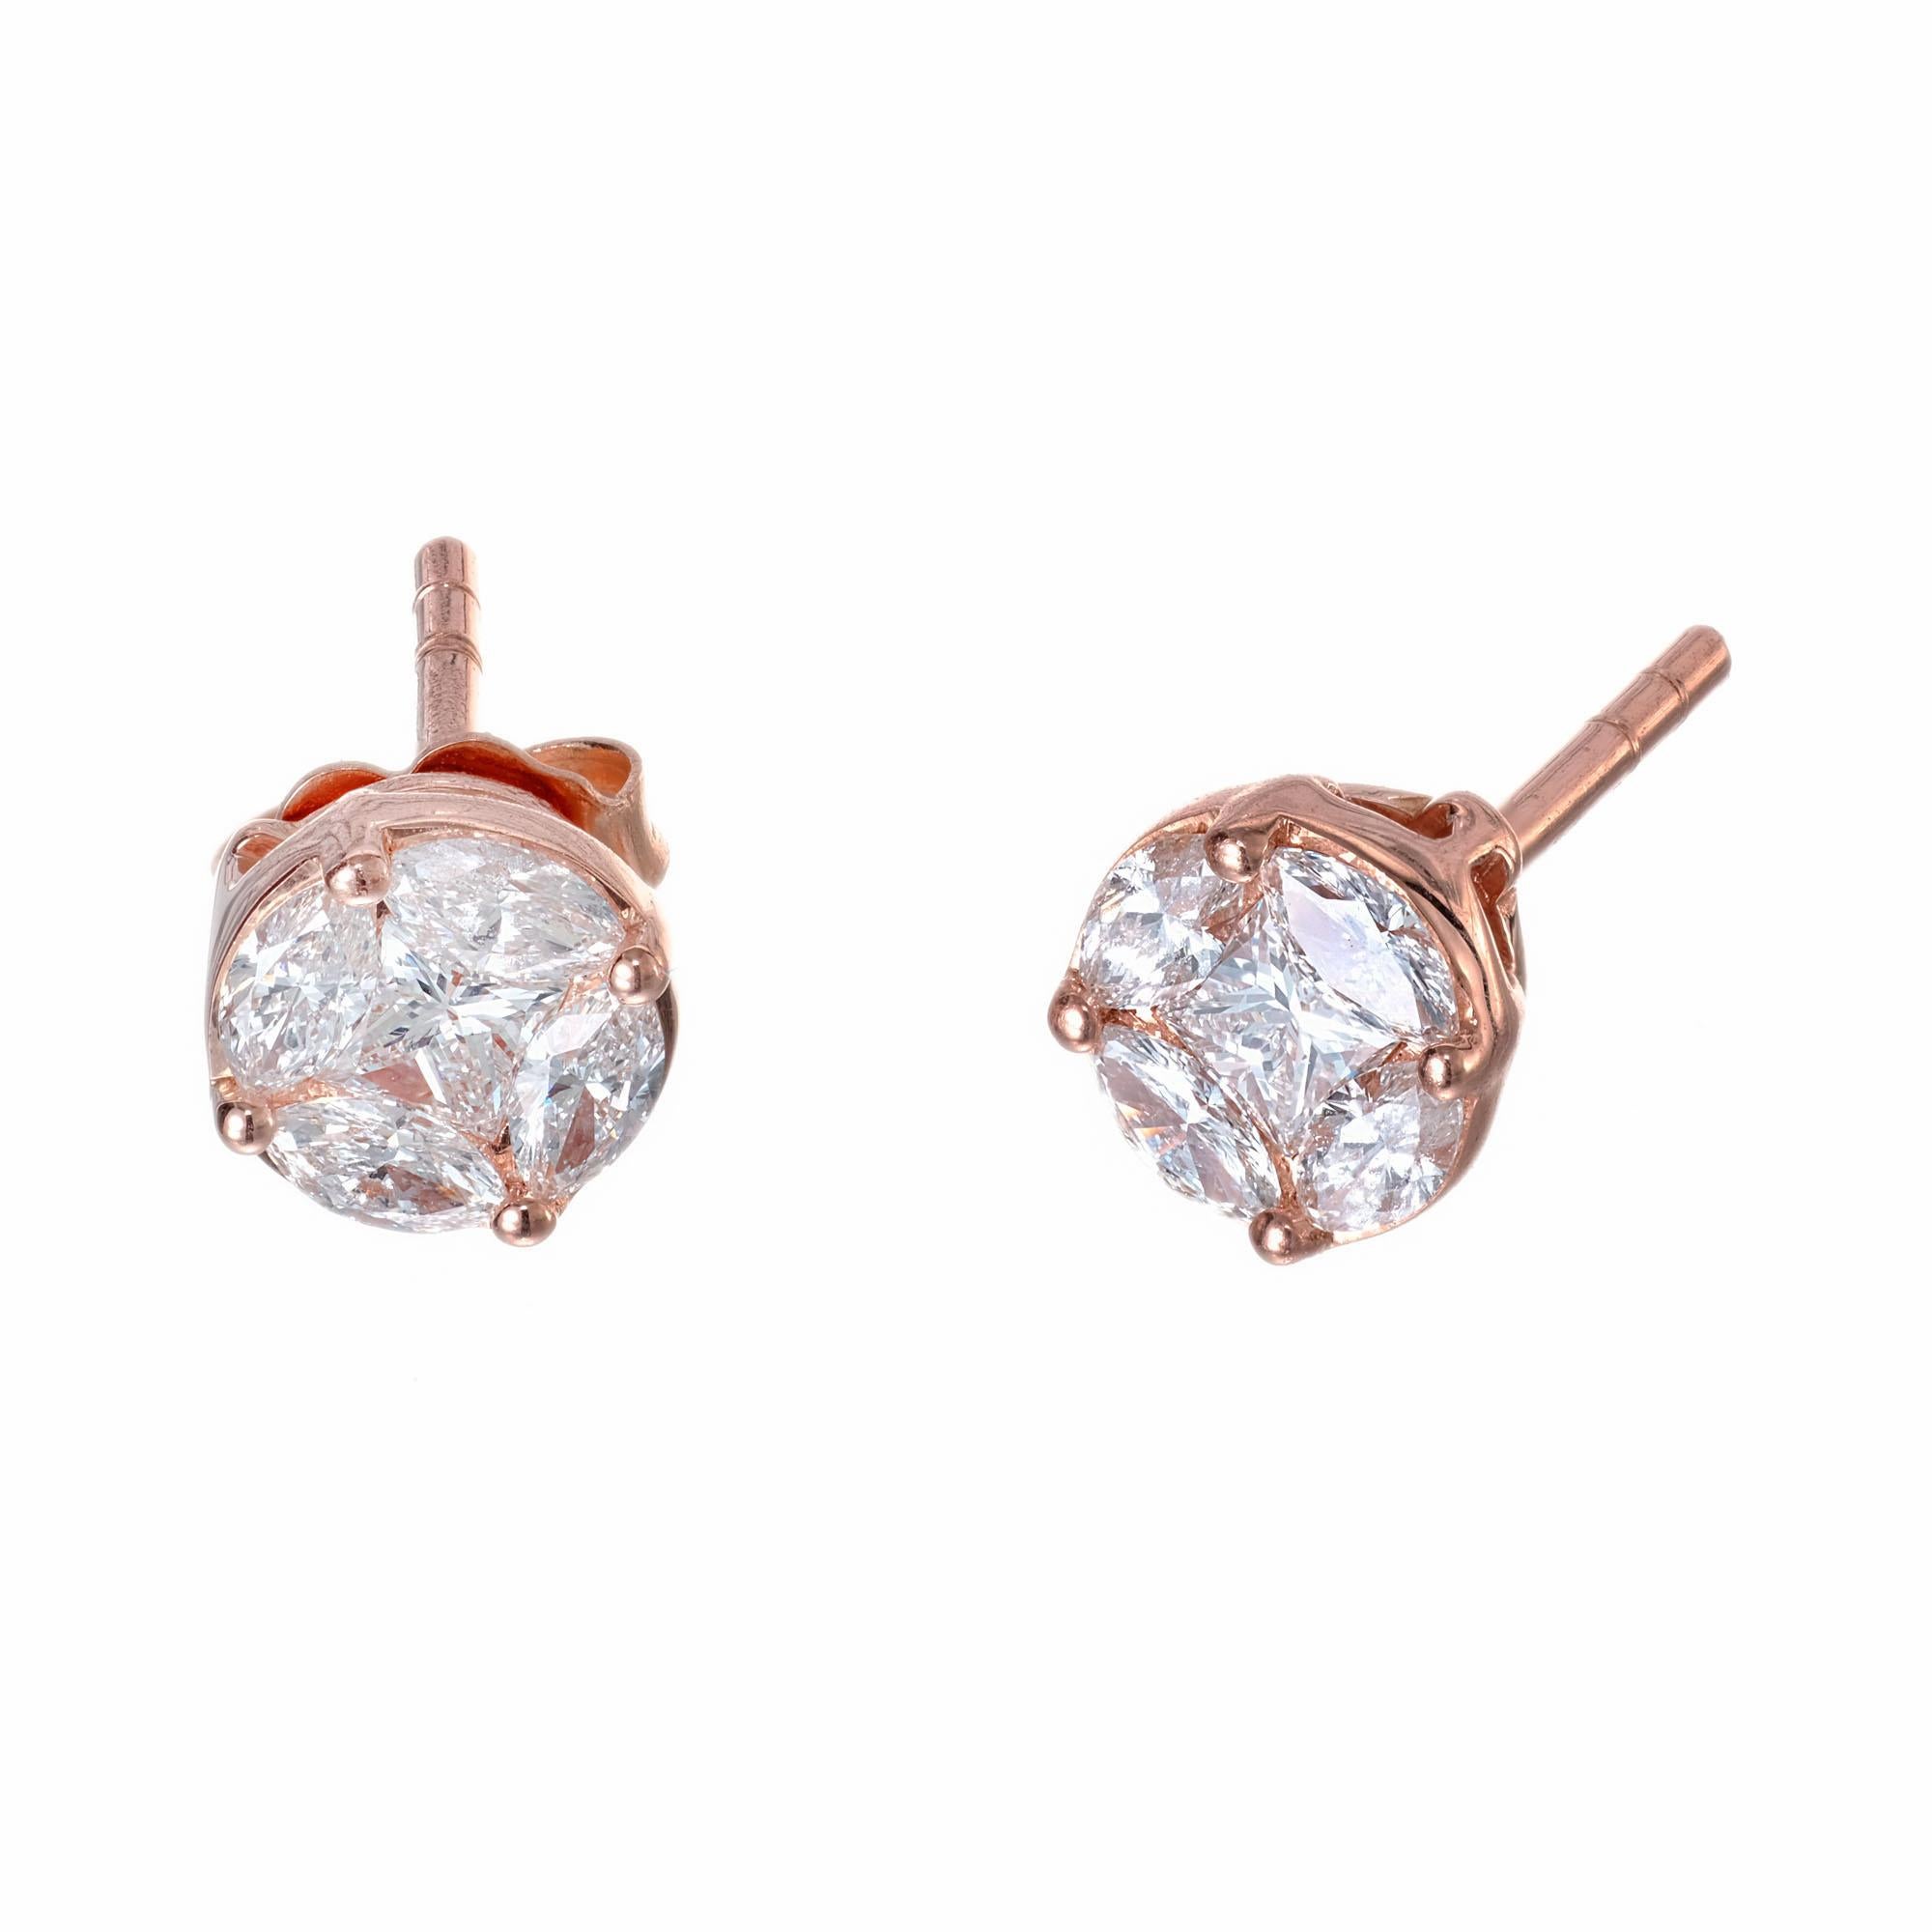 Marquise and round cut diamond earrings. Diamonds clustered together in a circle to look like a one carat each diamond studs.

8 marquise cut diamonds, G VS approx. .80cts
2 princess cut diamonds, G VS approx. .24cts
18k rose gold 
Stamped: 750
1.7